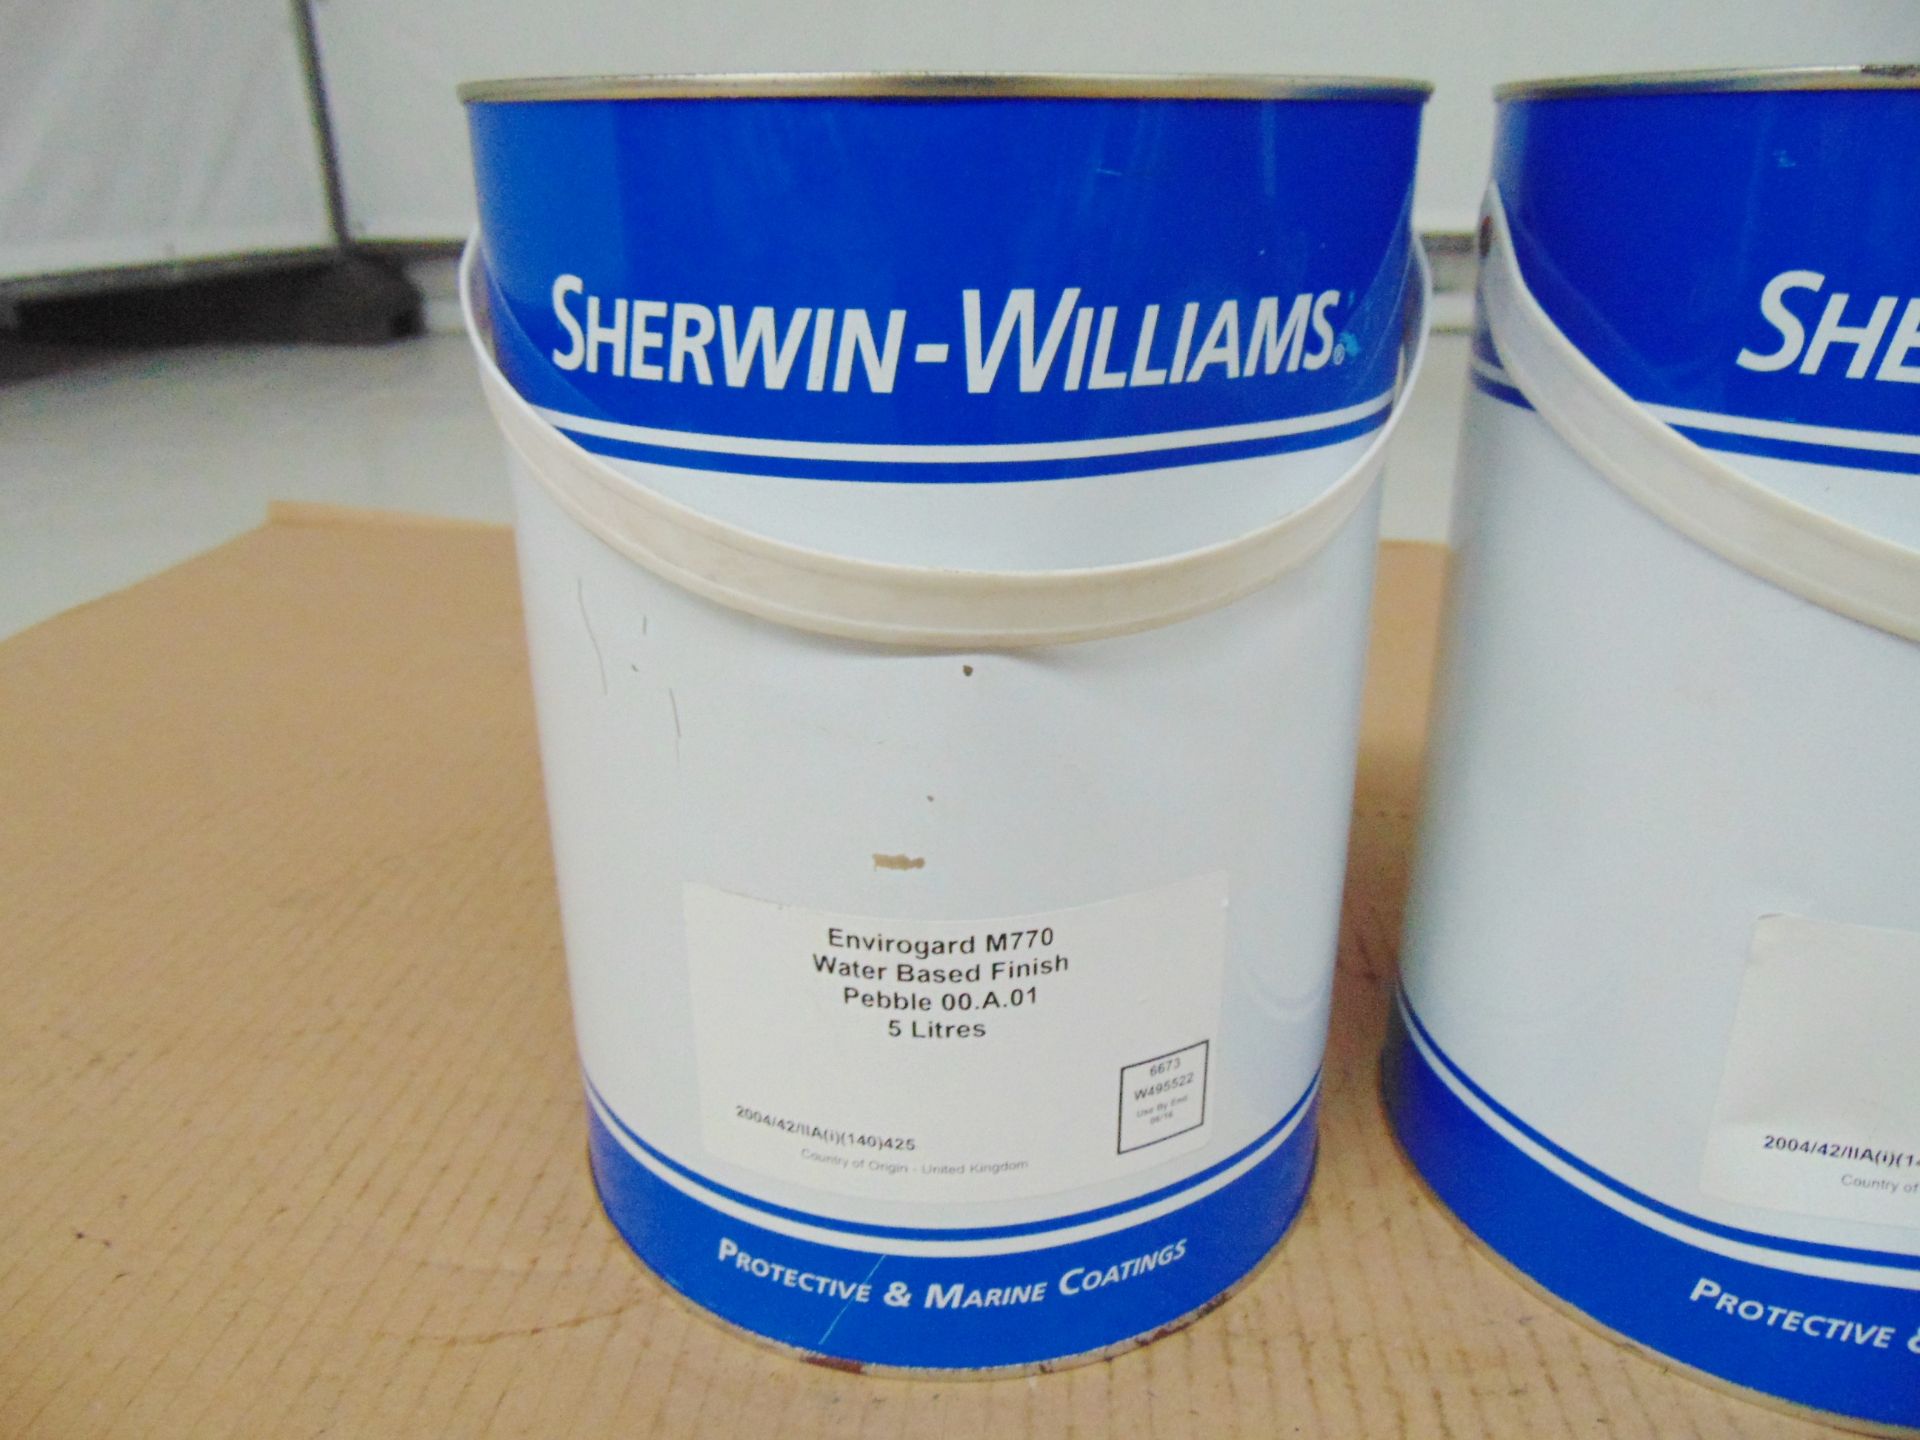 2 x Unissued Sherwin-Williams Sher-Cryl 5L M770 Water Based Sealercoat/Topcoat - Image 2 of 3